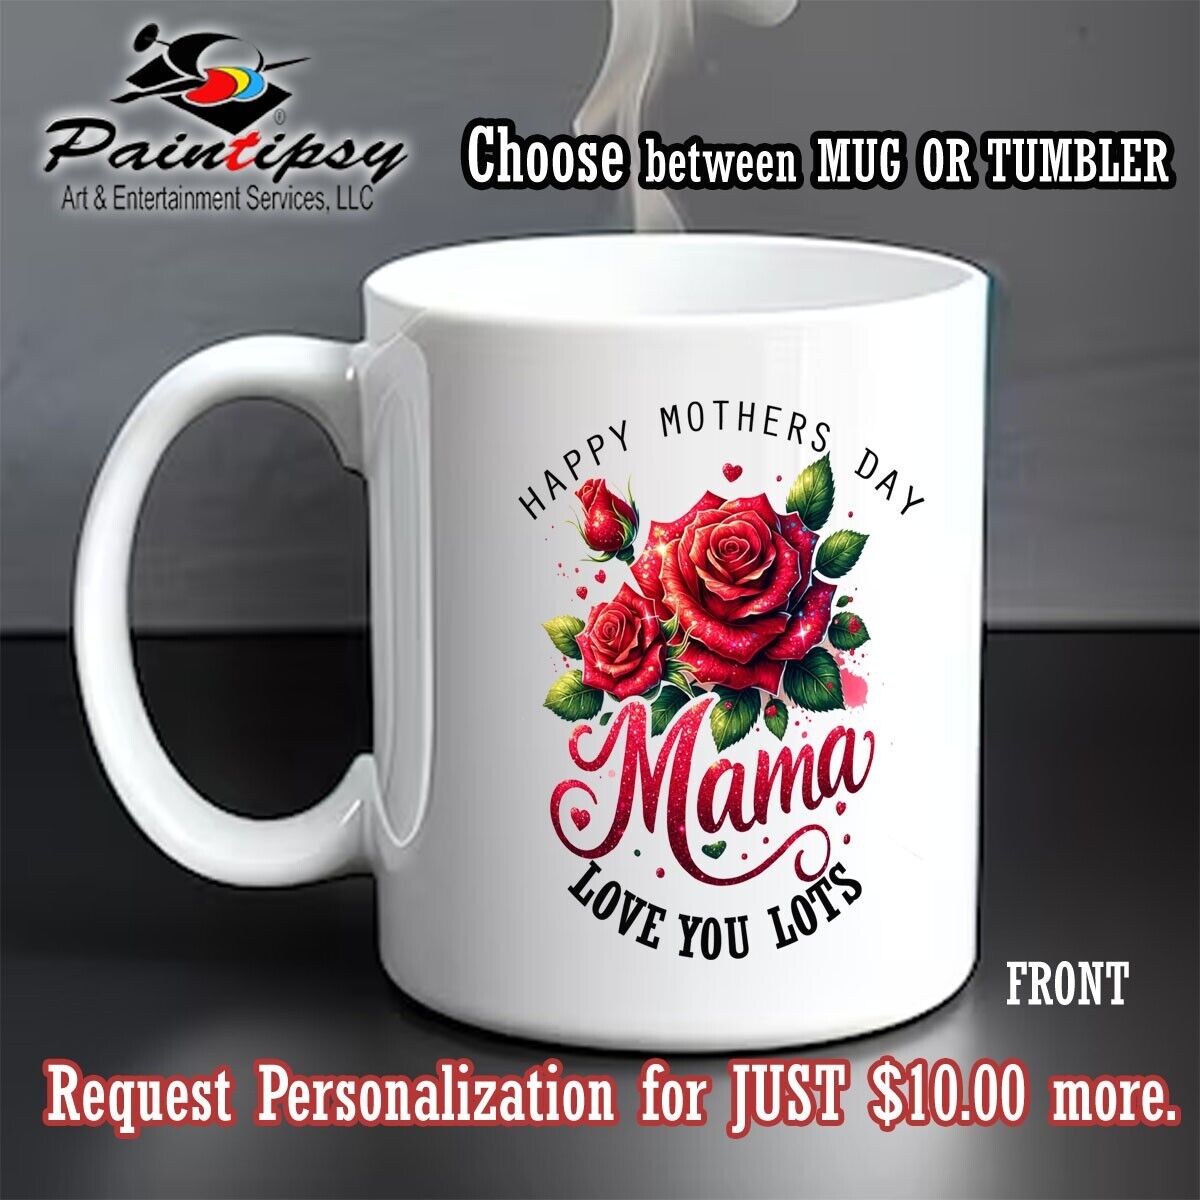 MOTHERS DAY GIFT - PERSONALIZE AVAILABLE